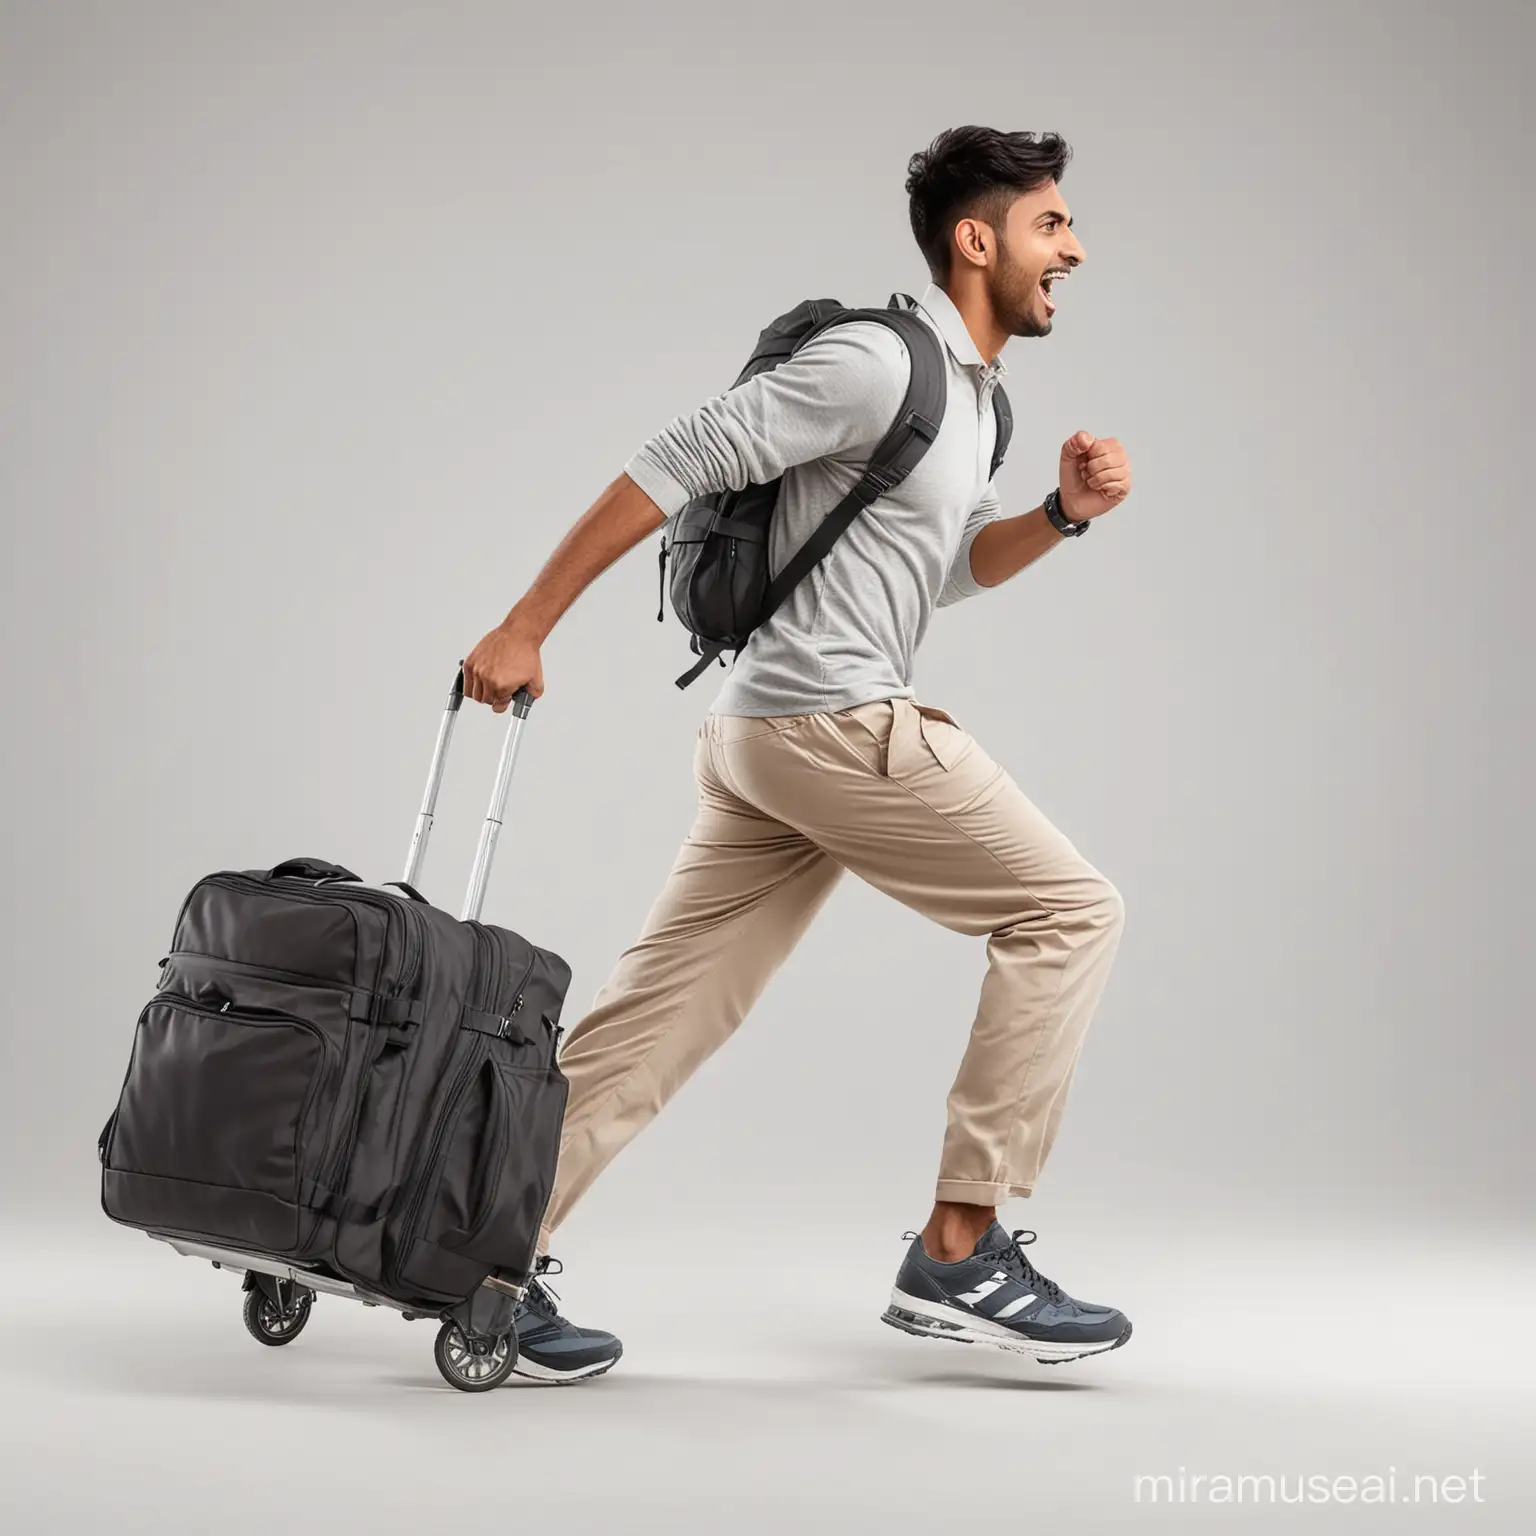 Young Indian Man Excitedly Running with Travel Trolley Bag